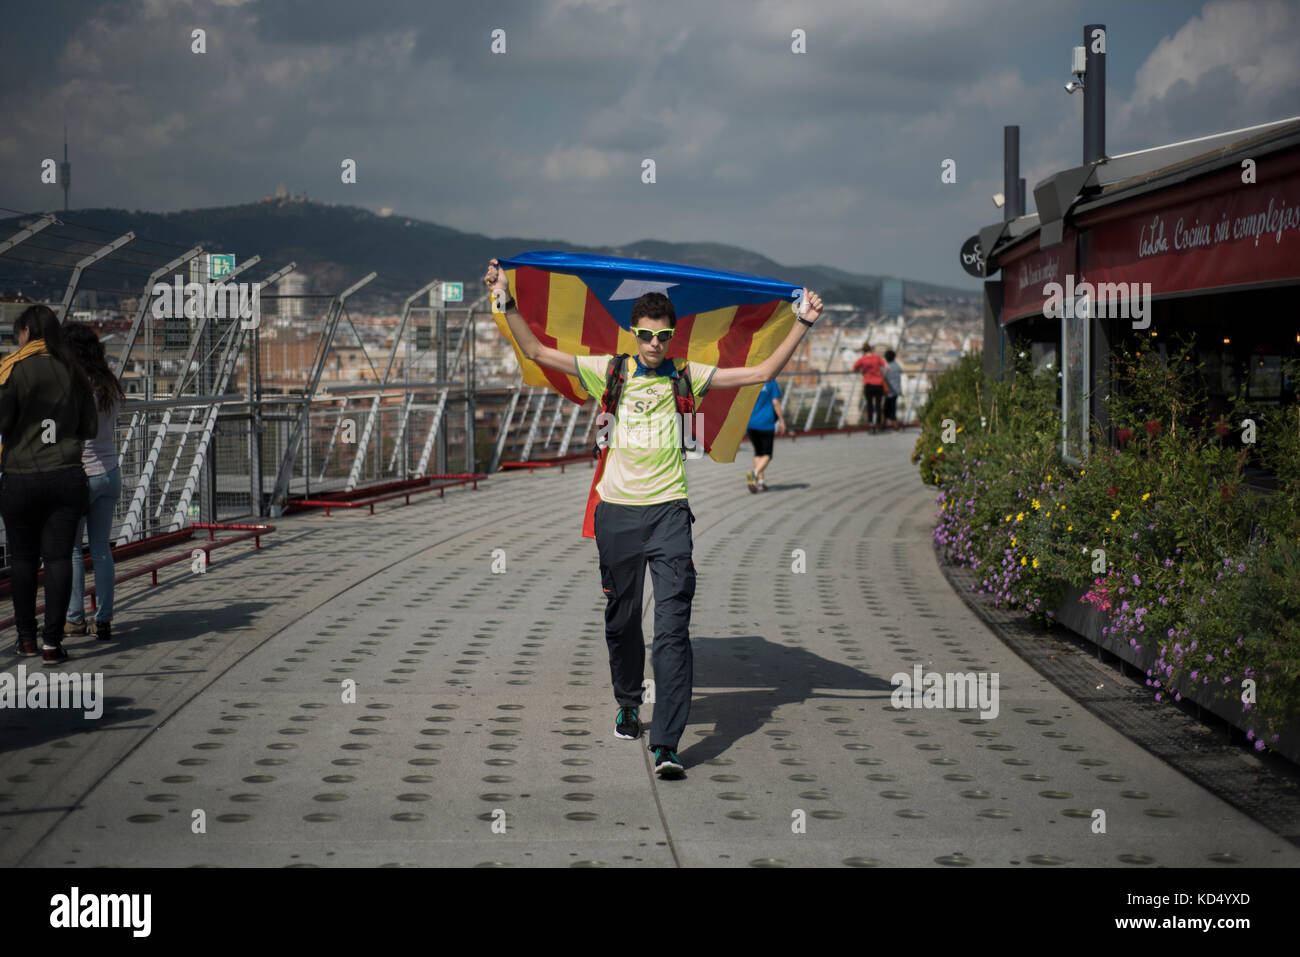 An independence activist holds a catalan independence flag over his head in Plaça d'Espanya (Spain Square), Barcelona. Credit: Alamy / Carles Desfilis Stock Photo